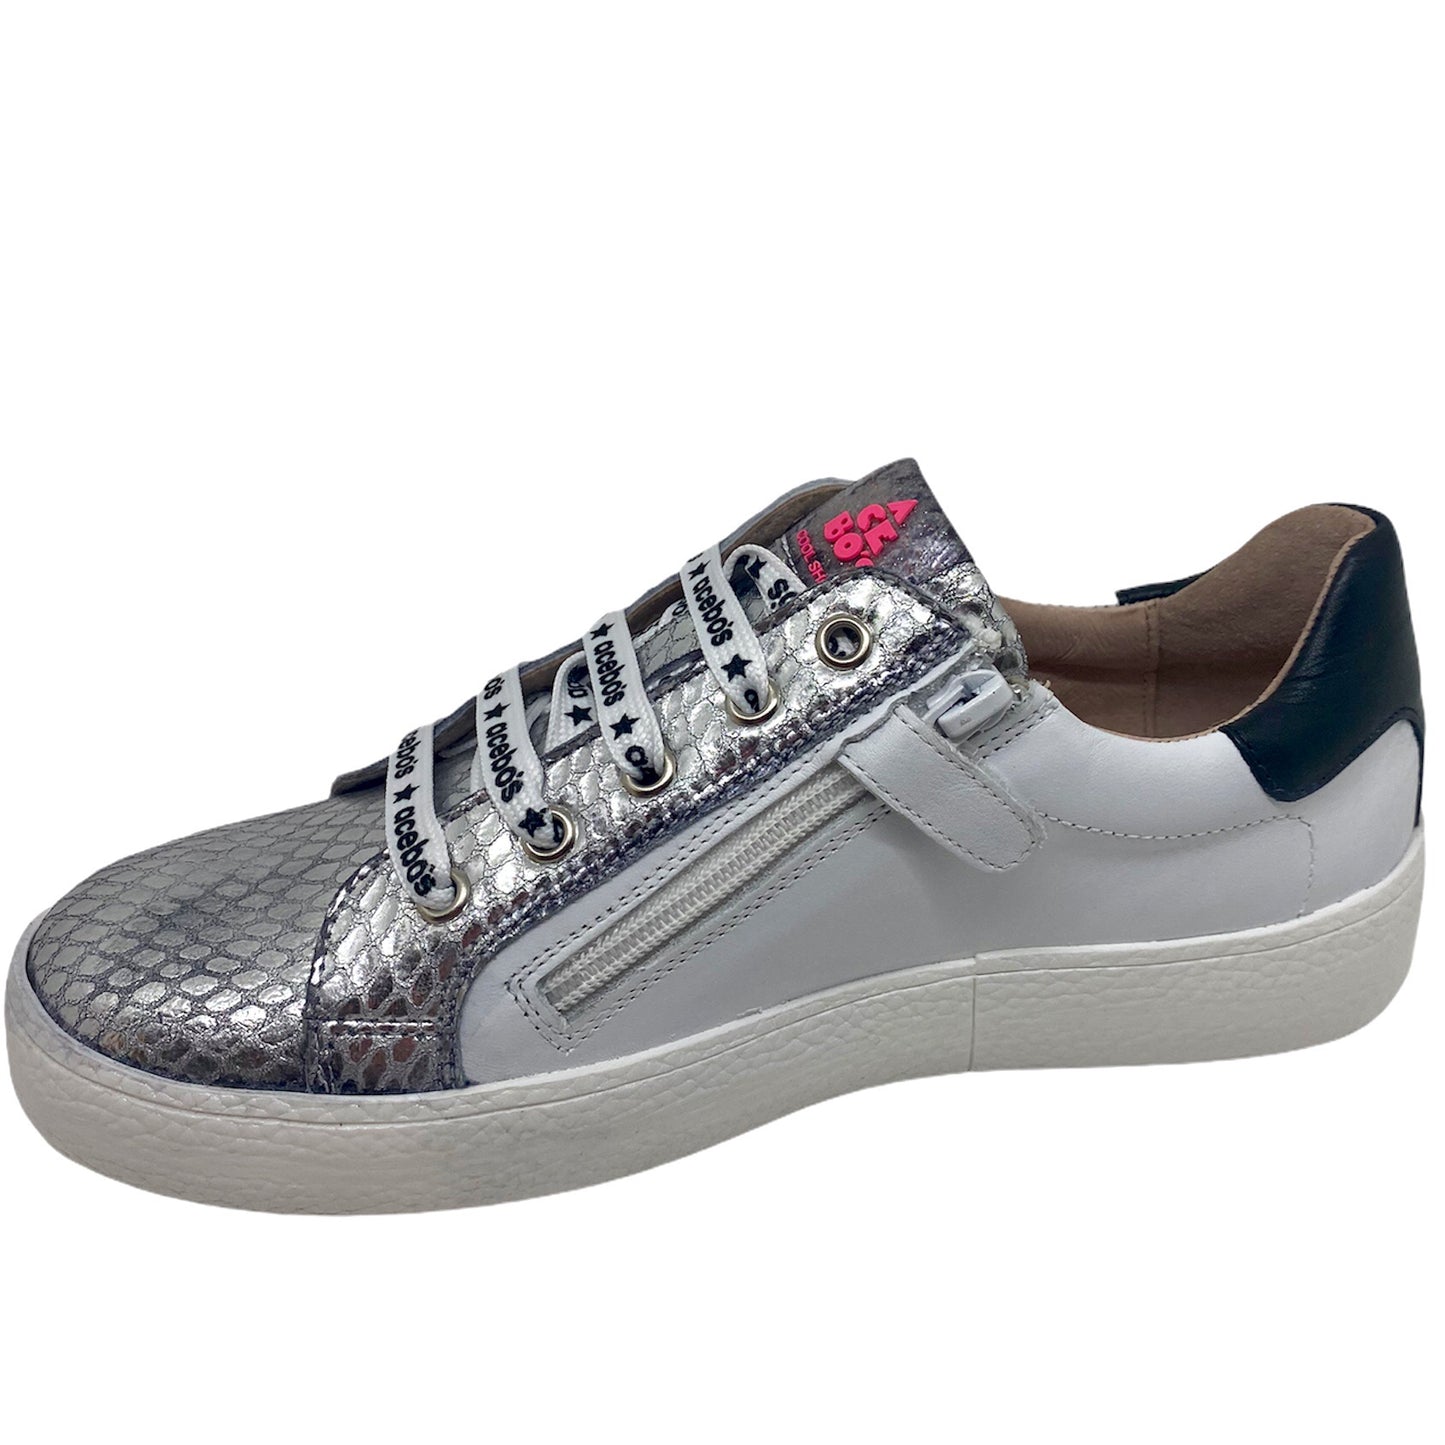 ACEBOS 9877MI blanc Chaussures Basses Baskets Sneakers